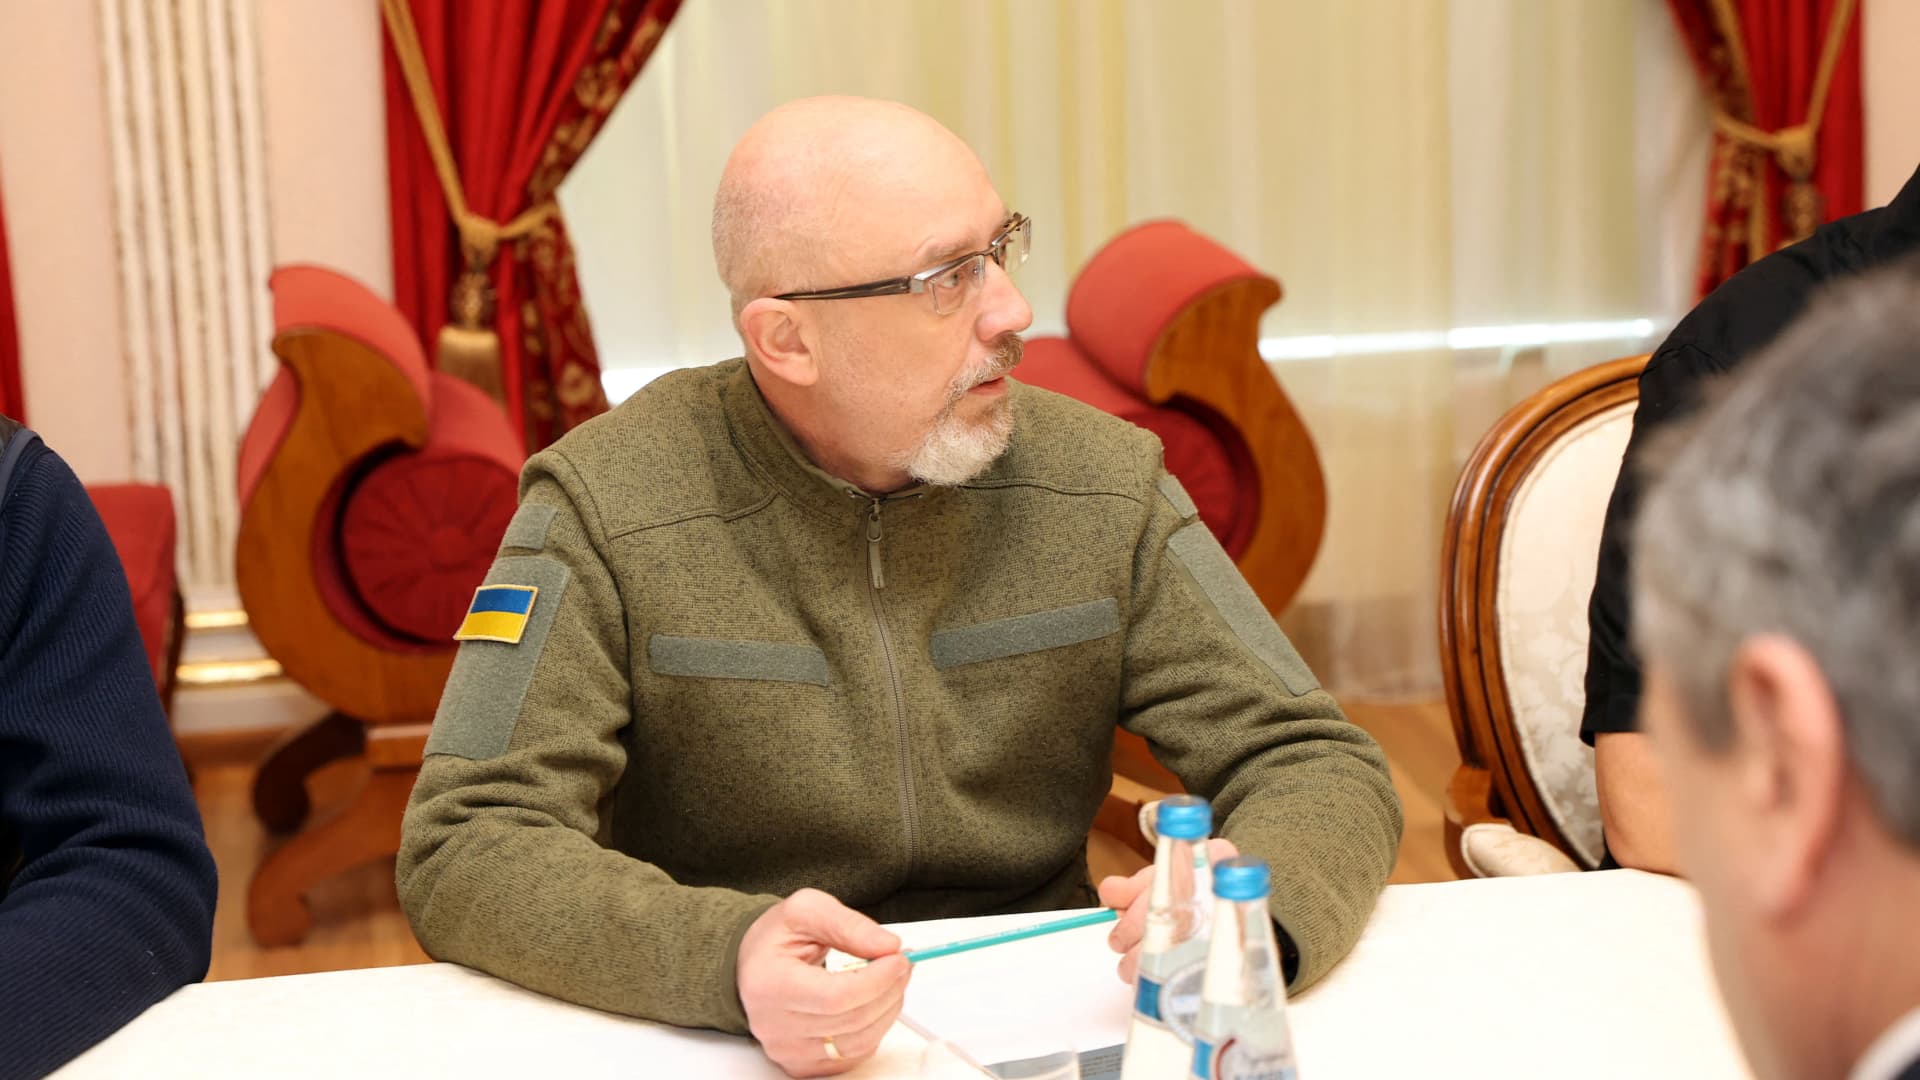 Ukraine's Defence Minister Oleksii Reznikov attends the talks with Russian officials in the Gomel region, Belarus February 28, 2022.